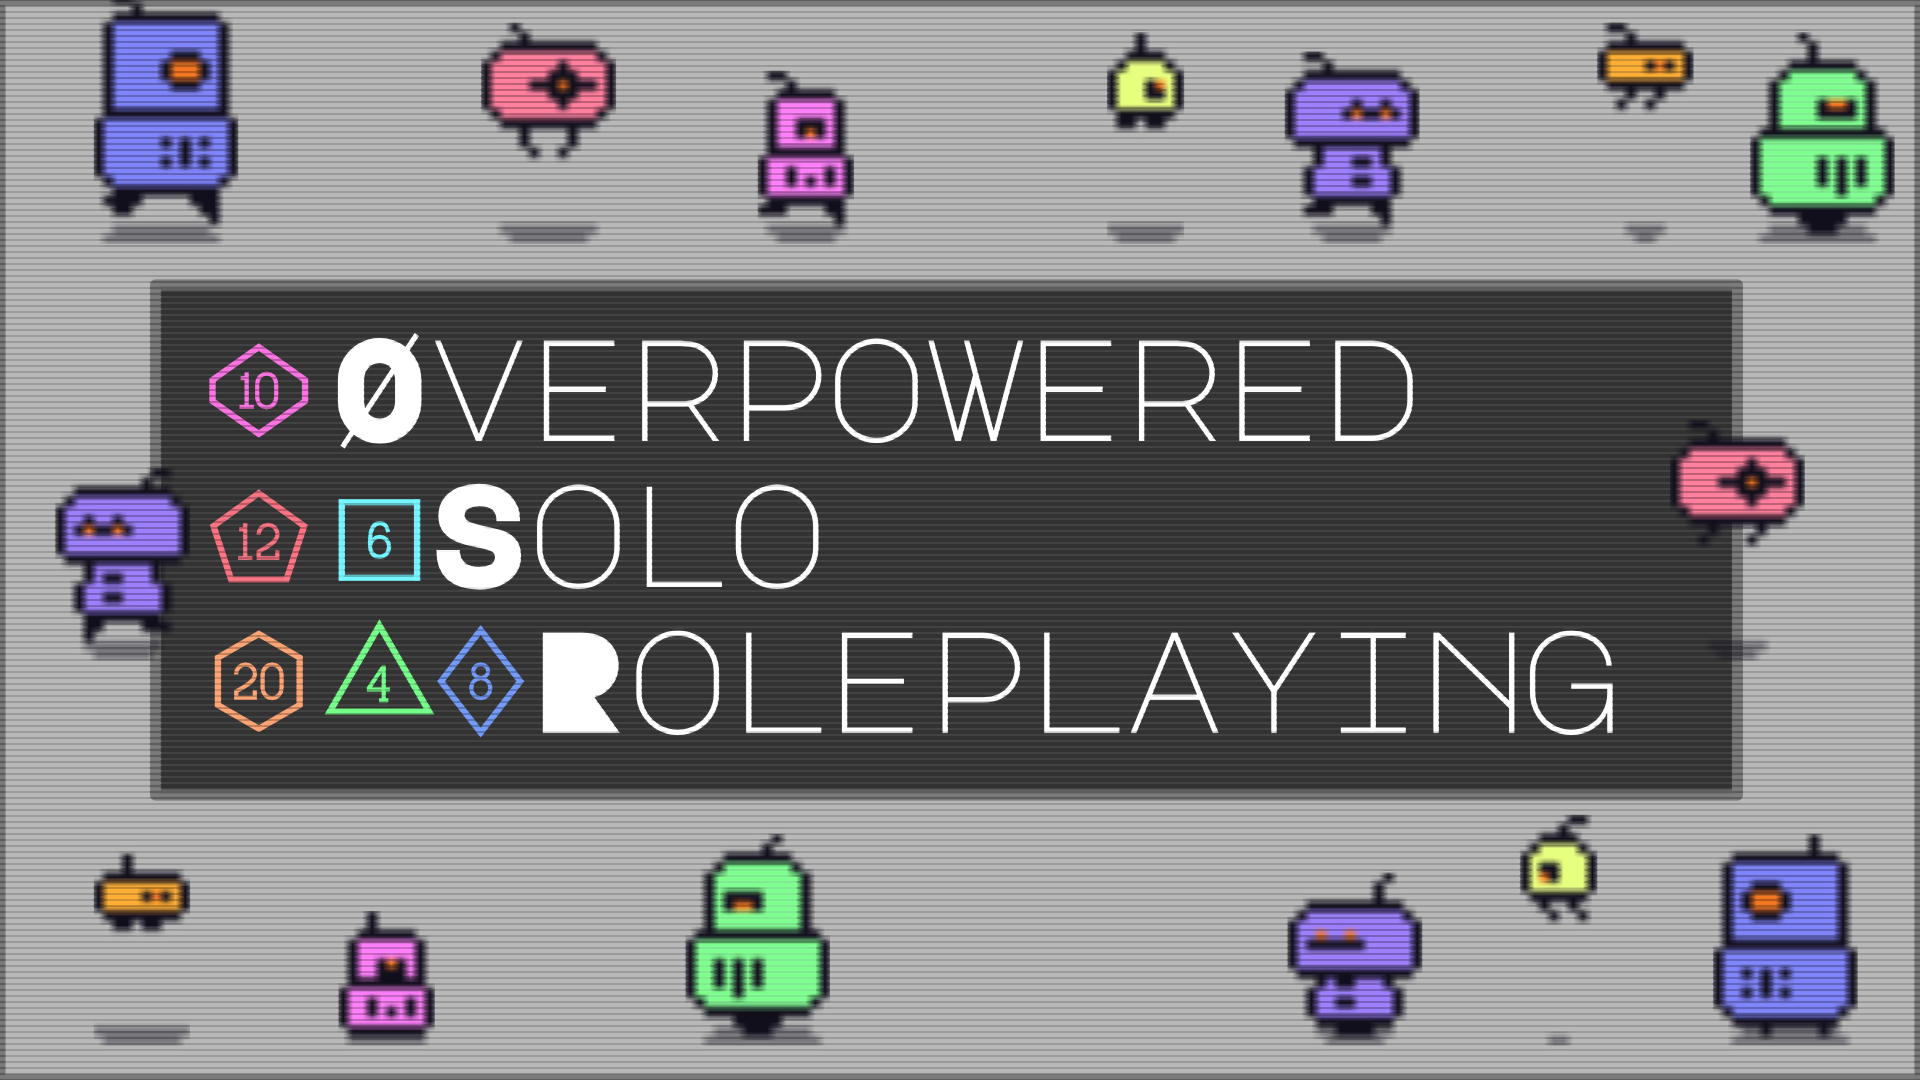 Overpowered Solo Roleplaying